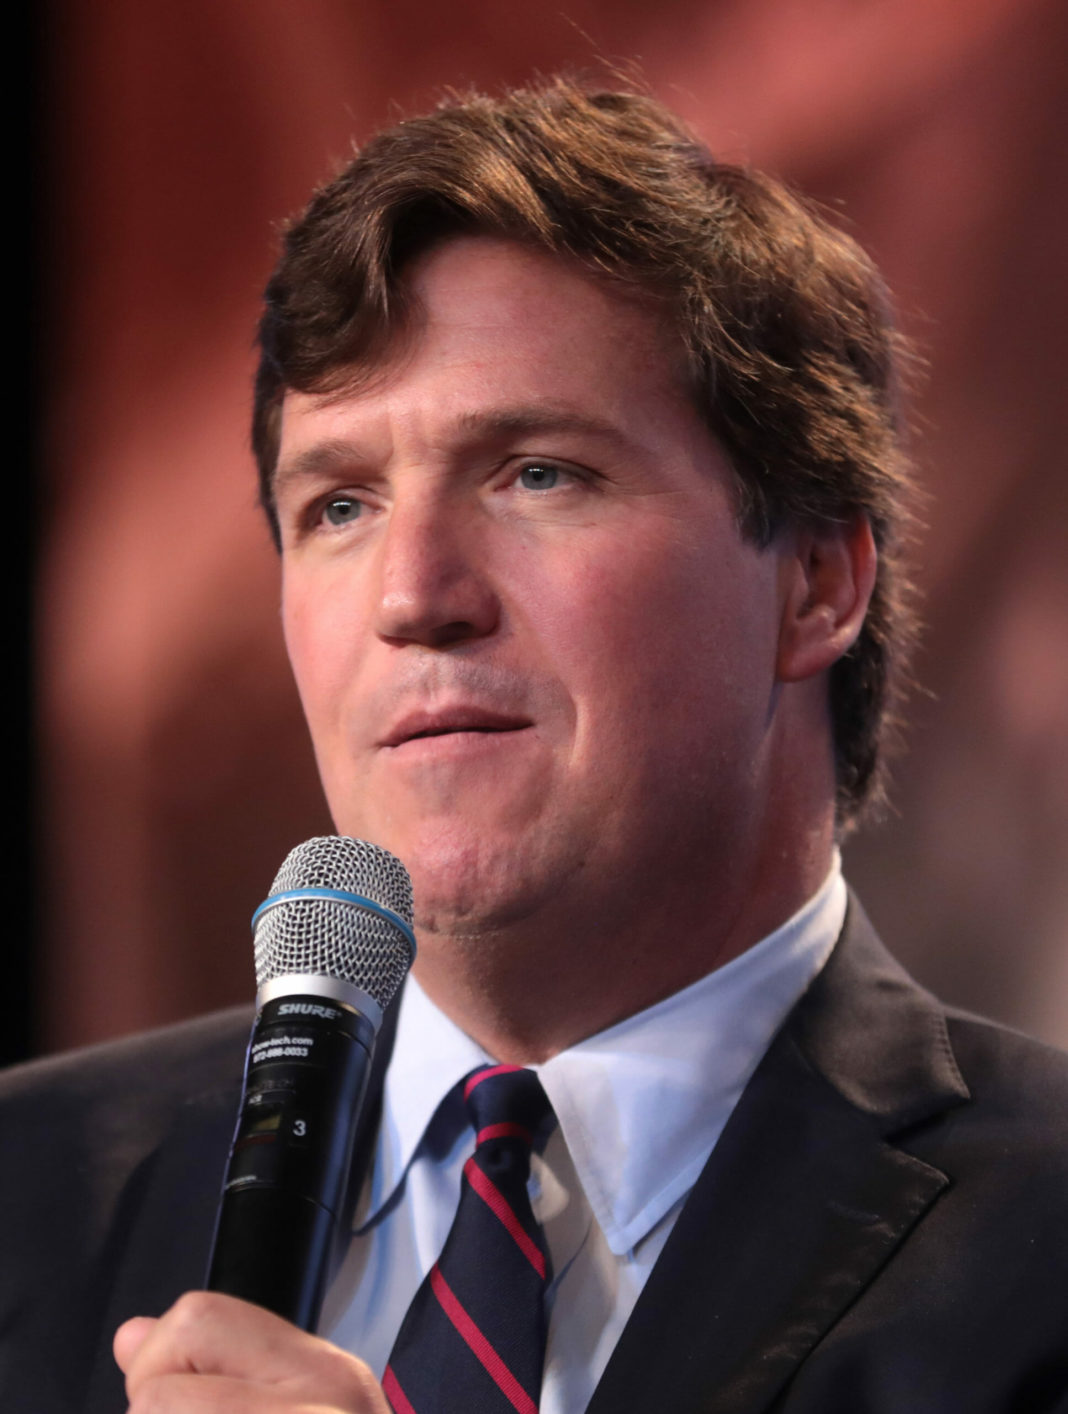 The personal life of Tucker Carlson, the host of the mostwatched show